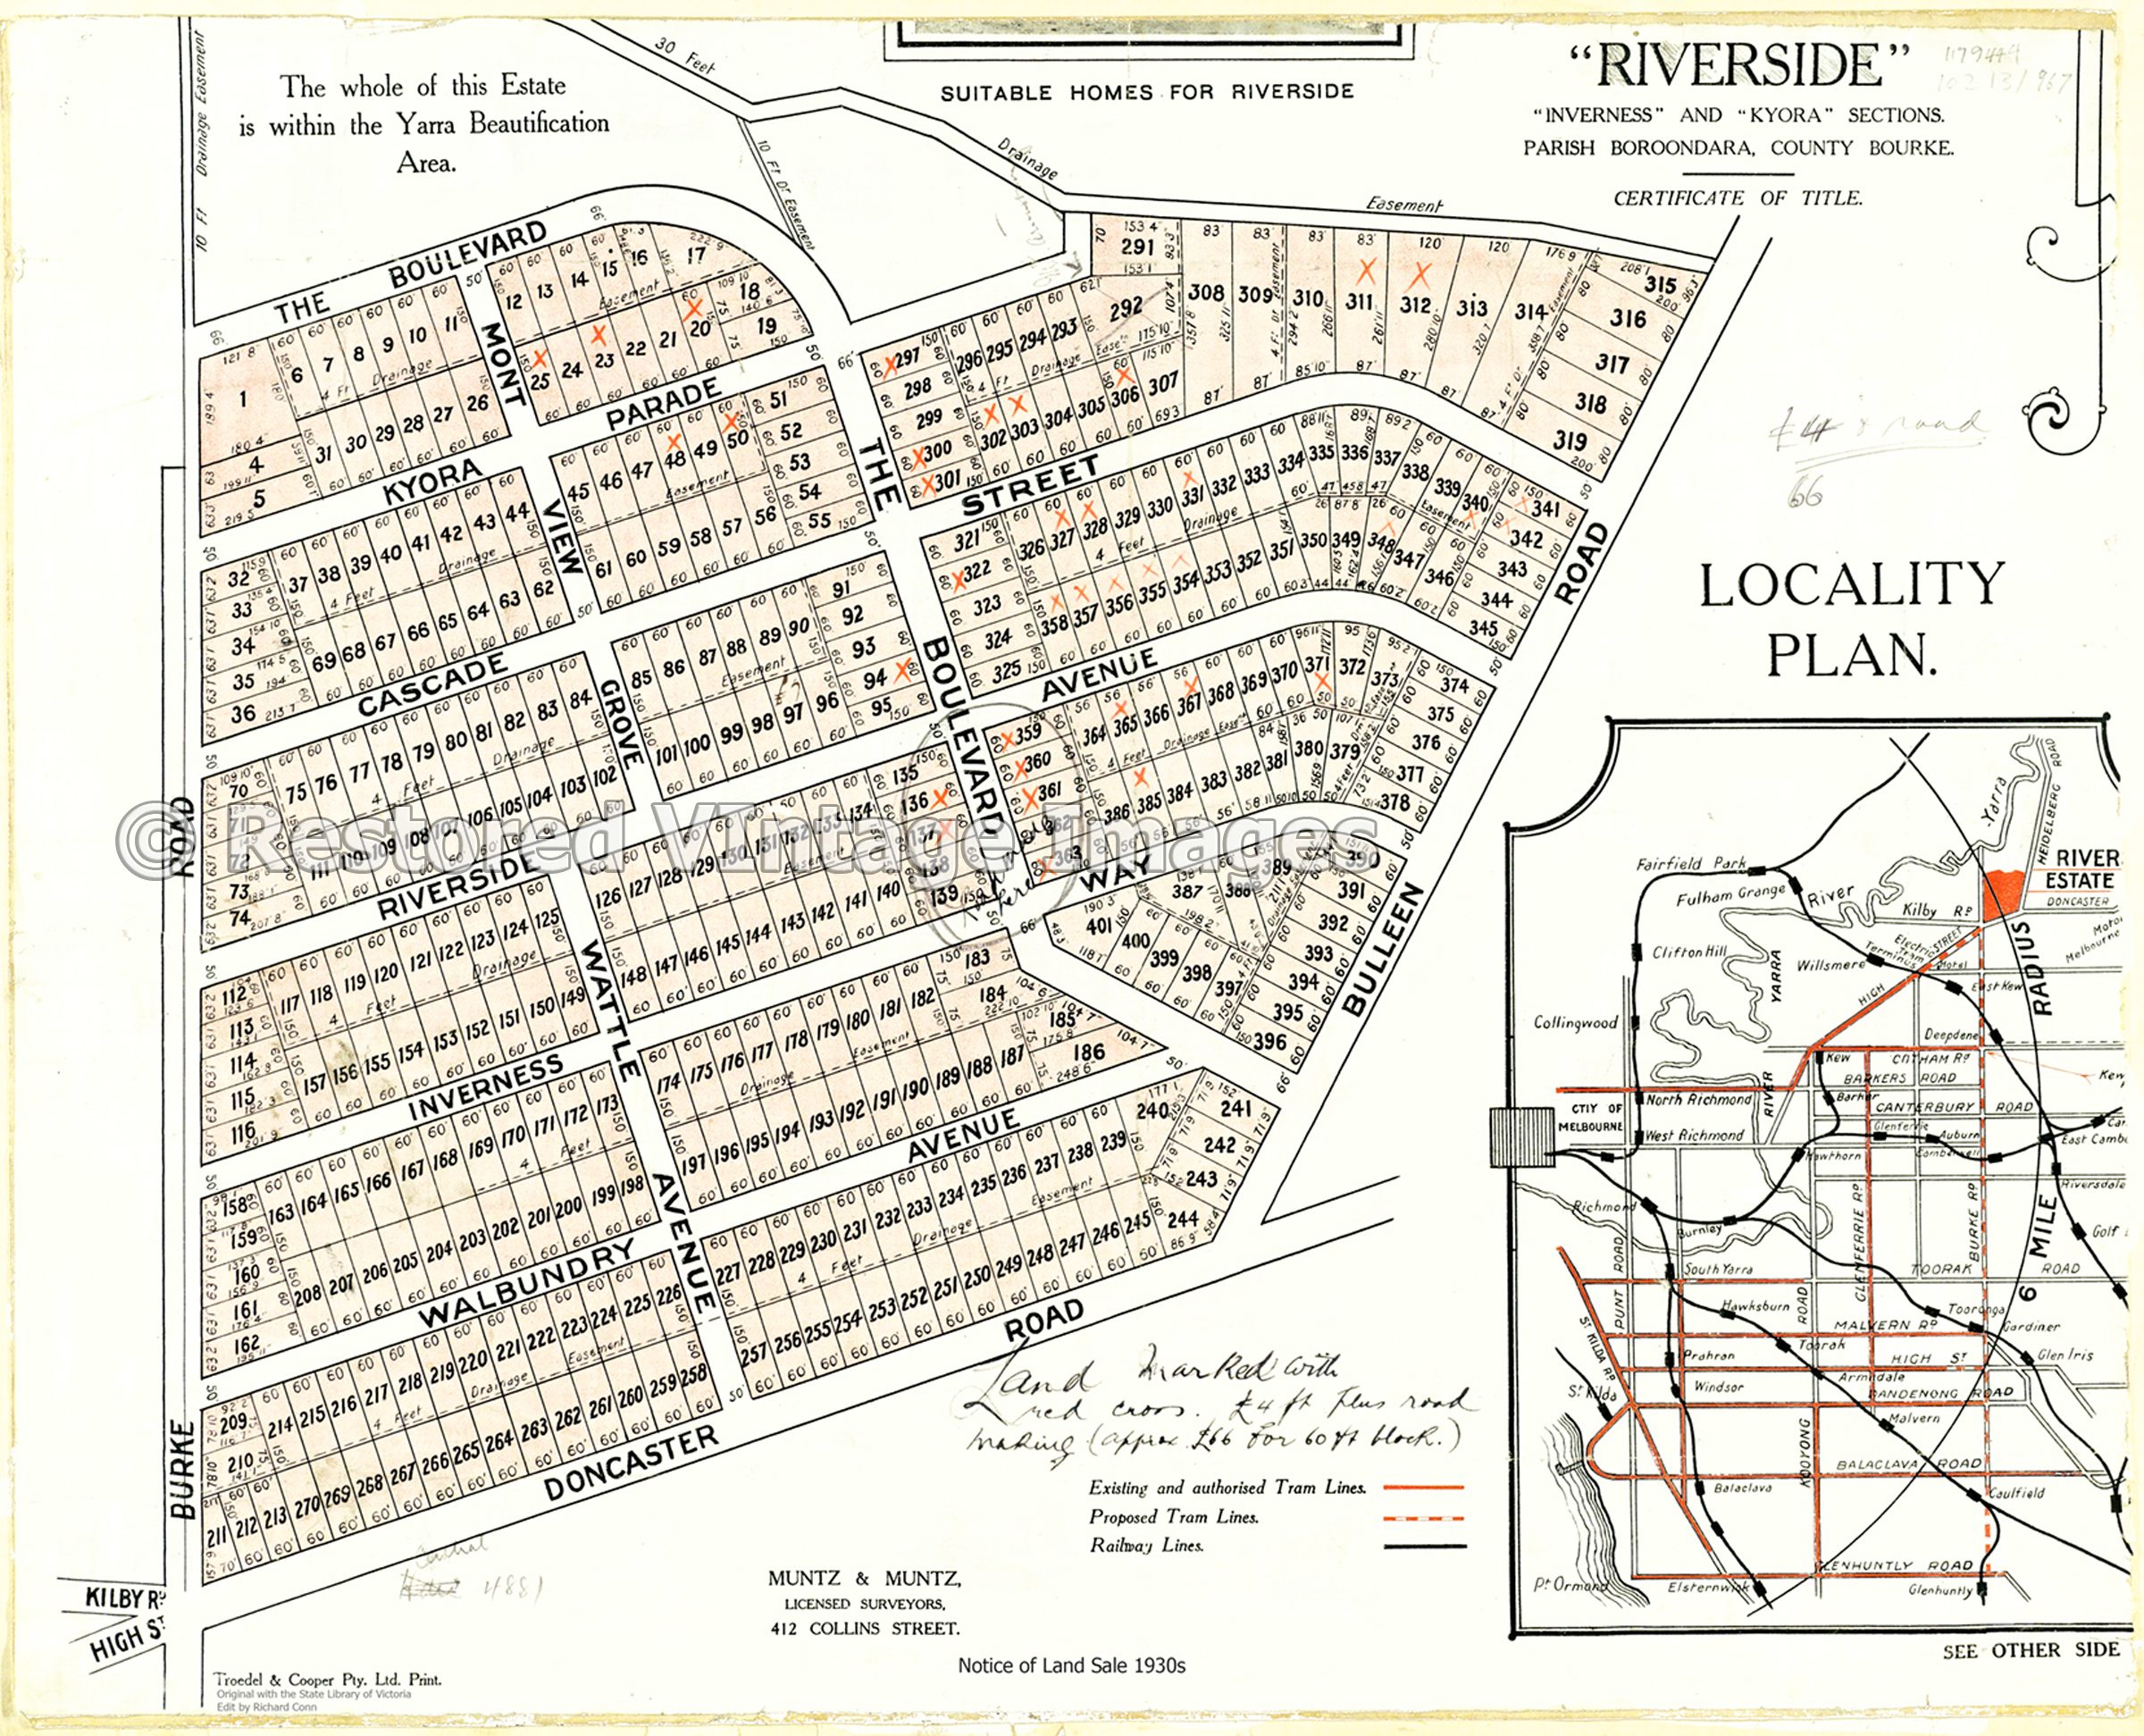 Riverside Inverness And Kyora Section 1930s – Kew East